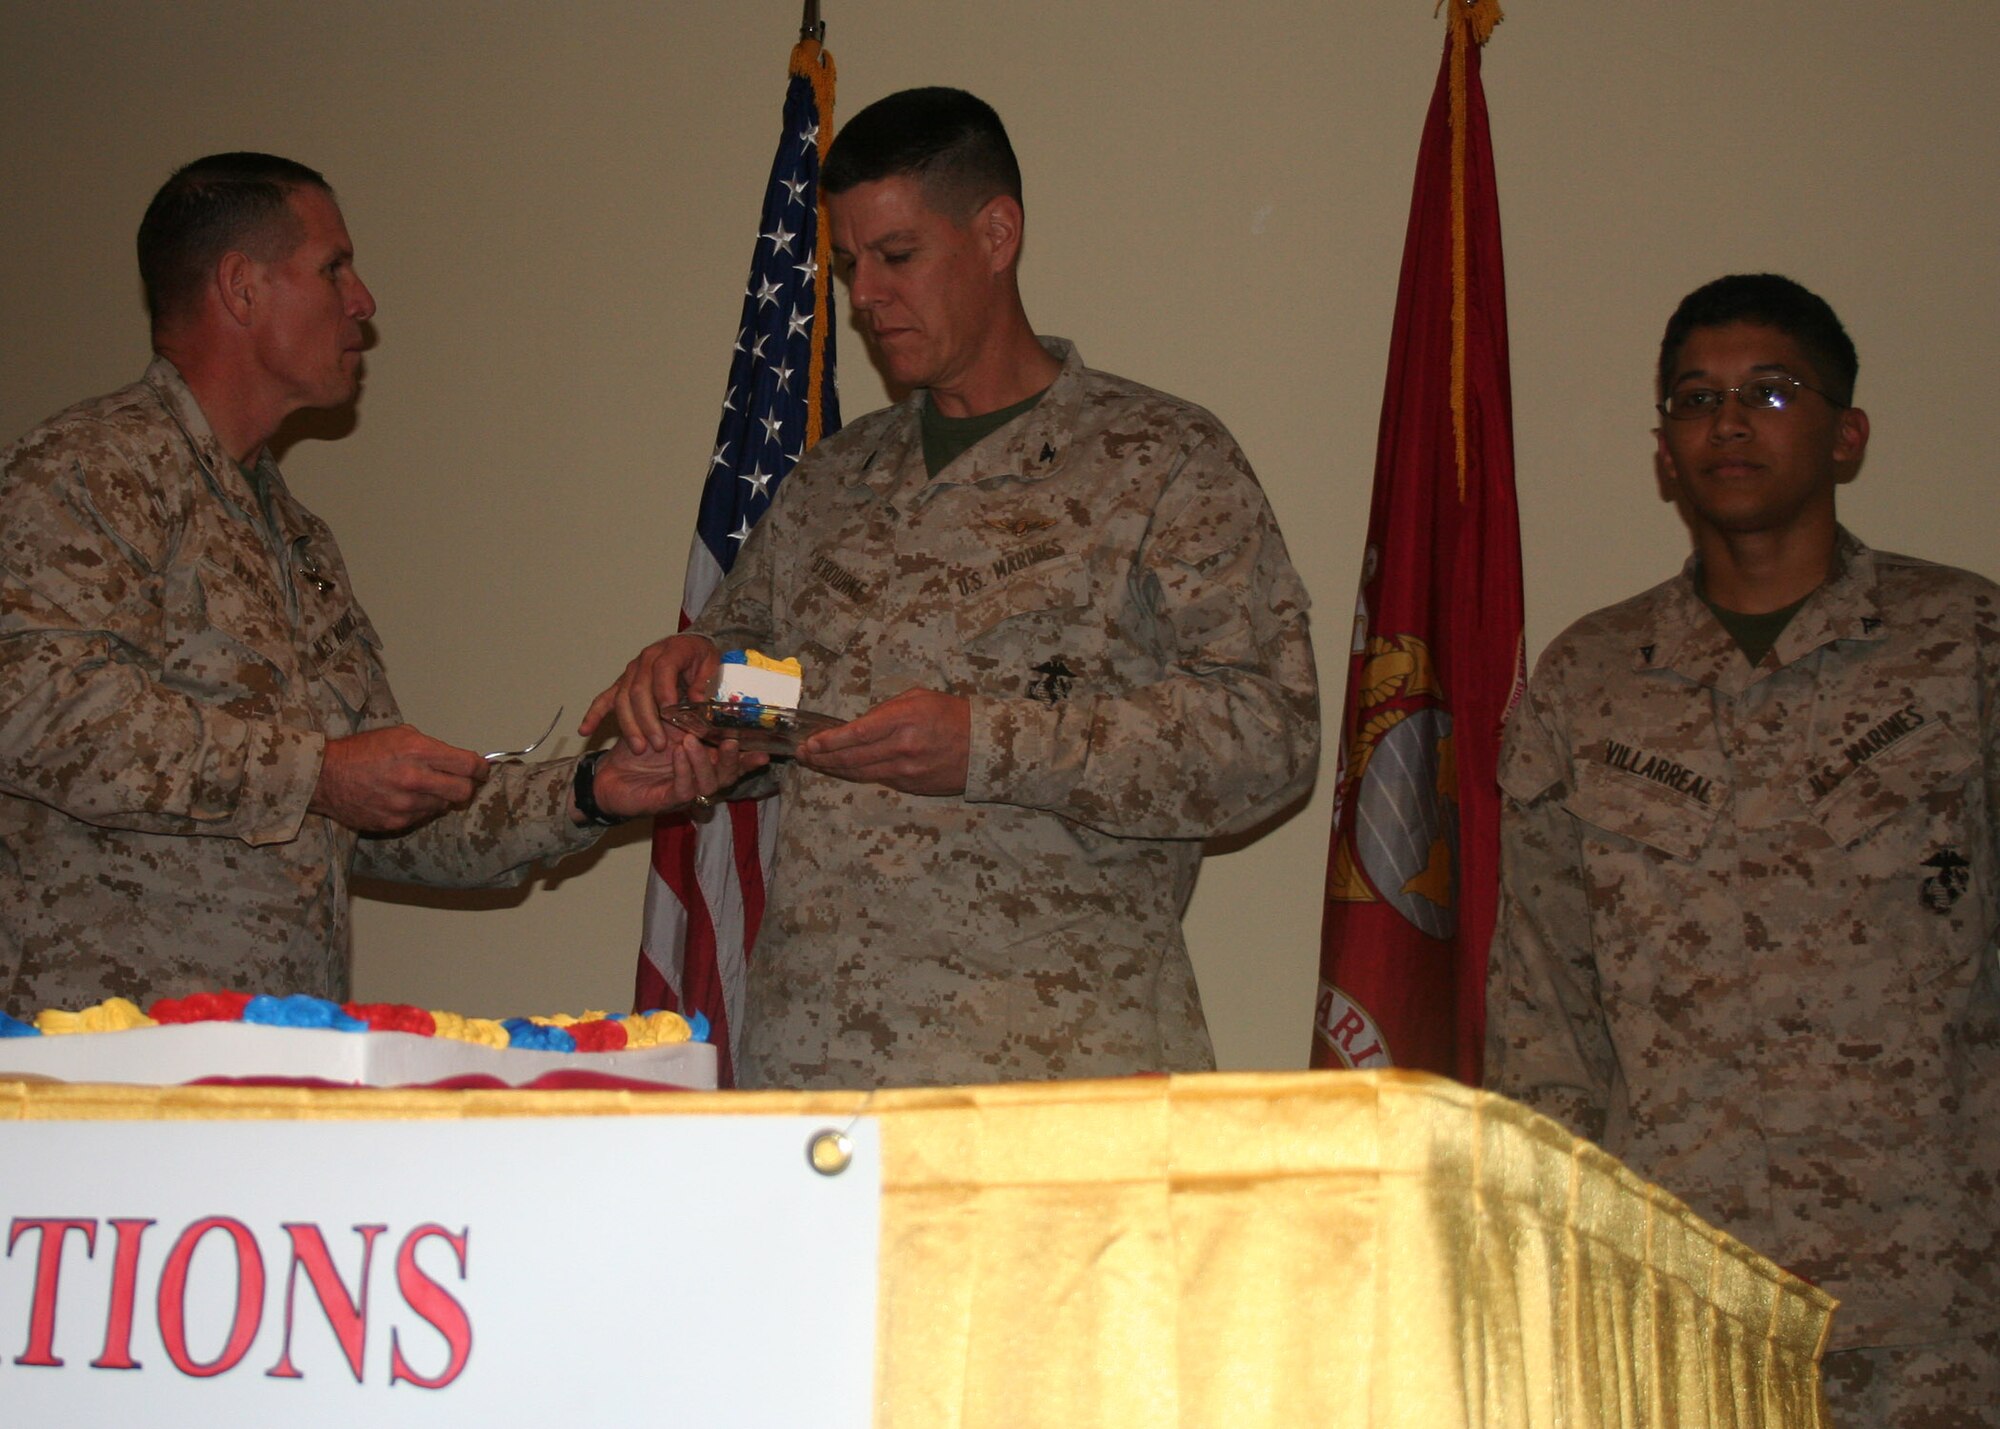 Brig. Gen. Robert Walsh, 2nd Marine Aircraft Wing assistant commander, hands a piece of cake to Col. Patrick O’Rourke, 2nd MAW. Also on stage is Lance Cpl. Lorenzo Villareal, 2nd MAW. Colonel O’Rourke and Corporal Villareal were the oldest and youngest Marines present during the ceremony here at Lajes Field commemorating the 233rd birthday of the Marine Corps. (U.S. Air Force photo by 1st Lt. George Tobias)